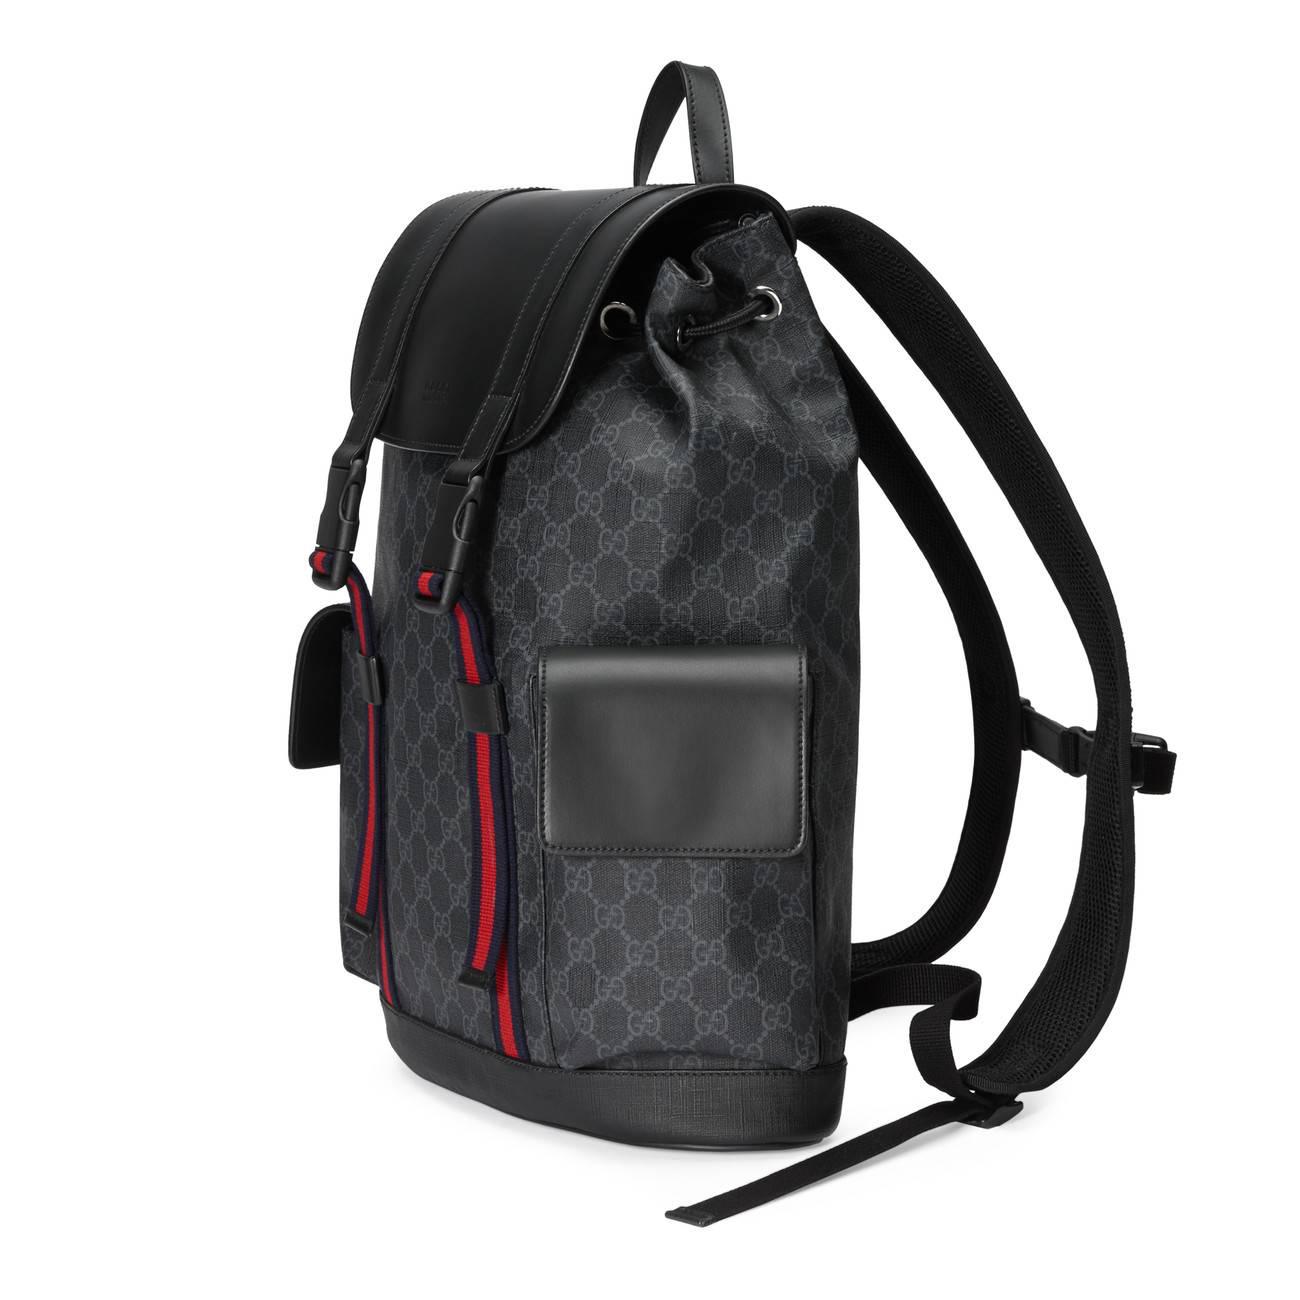 Gucci Canvas Soft GG Supreme Backpack in Blue for Men - Lyst